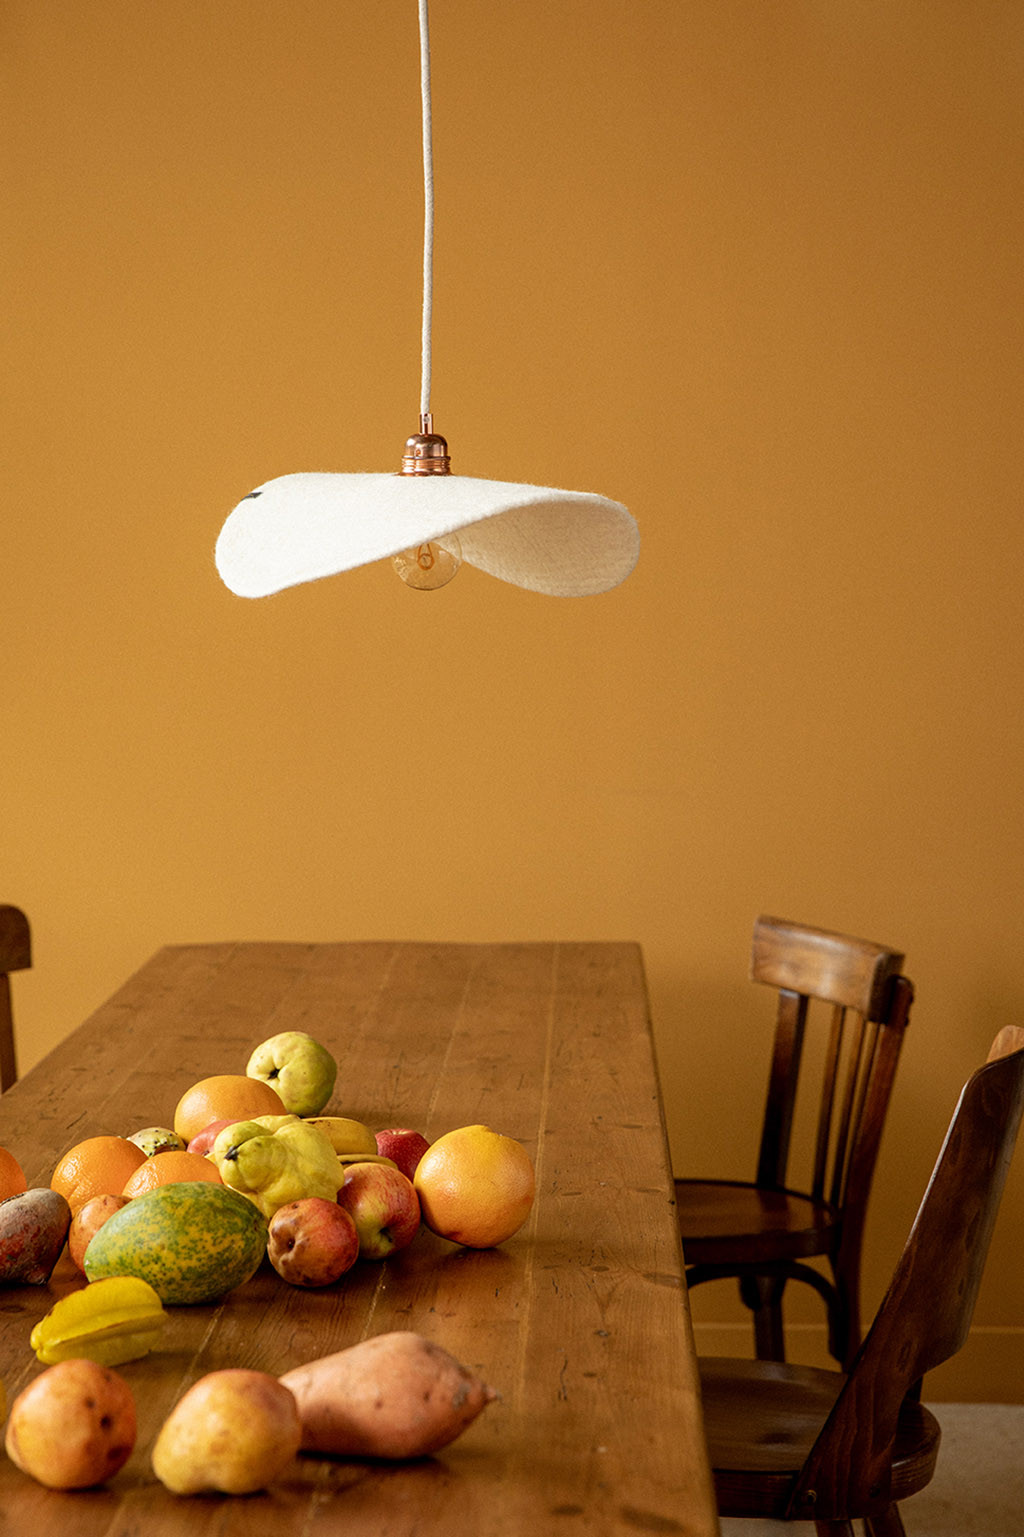 A white ceiling light above the dining room table